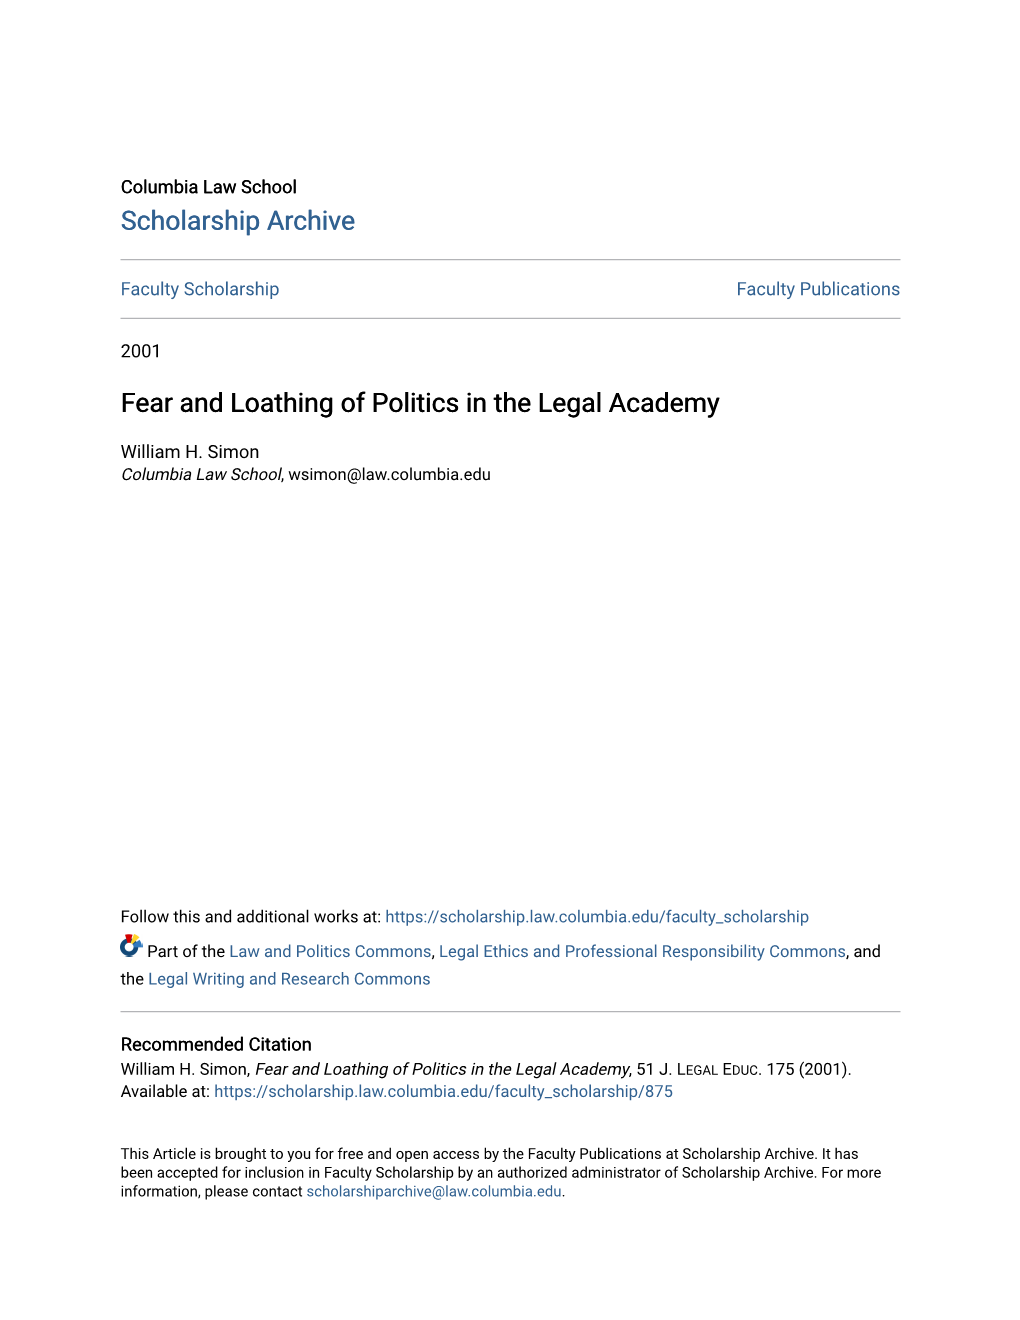 Fear and Loathing of Politics in the Legal Academy